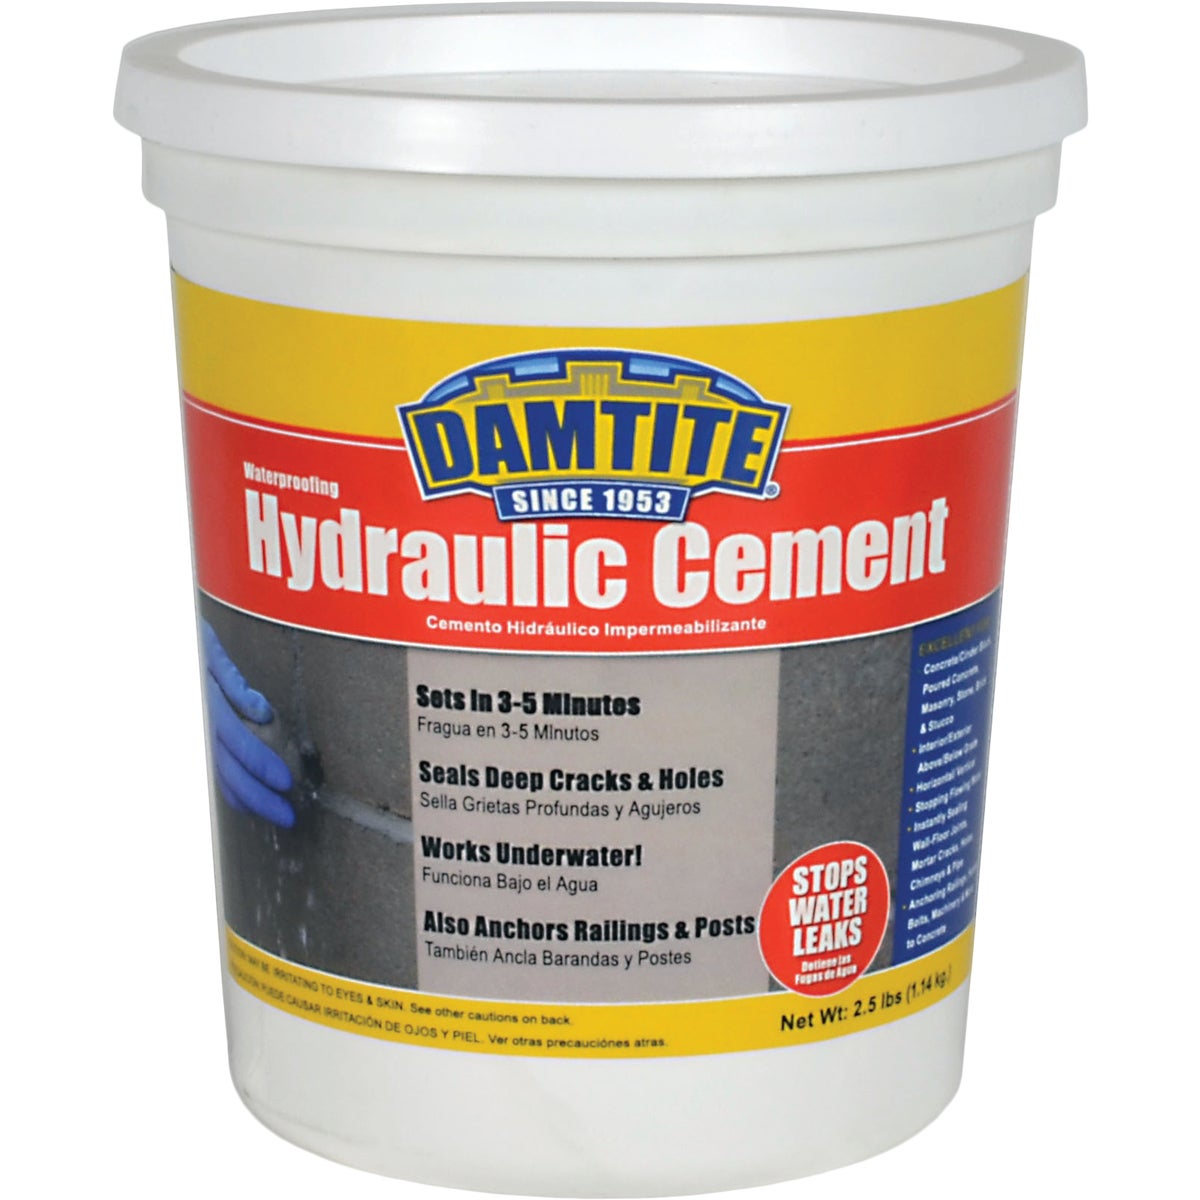 Item 275956, A cement-based, quick-set hydraulic cement for concrete and masonry.